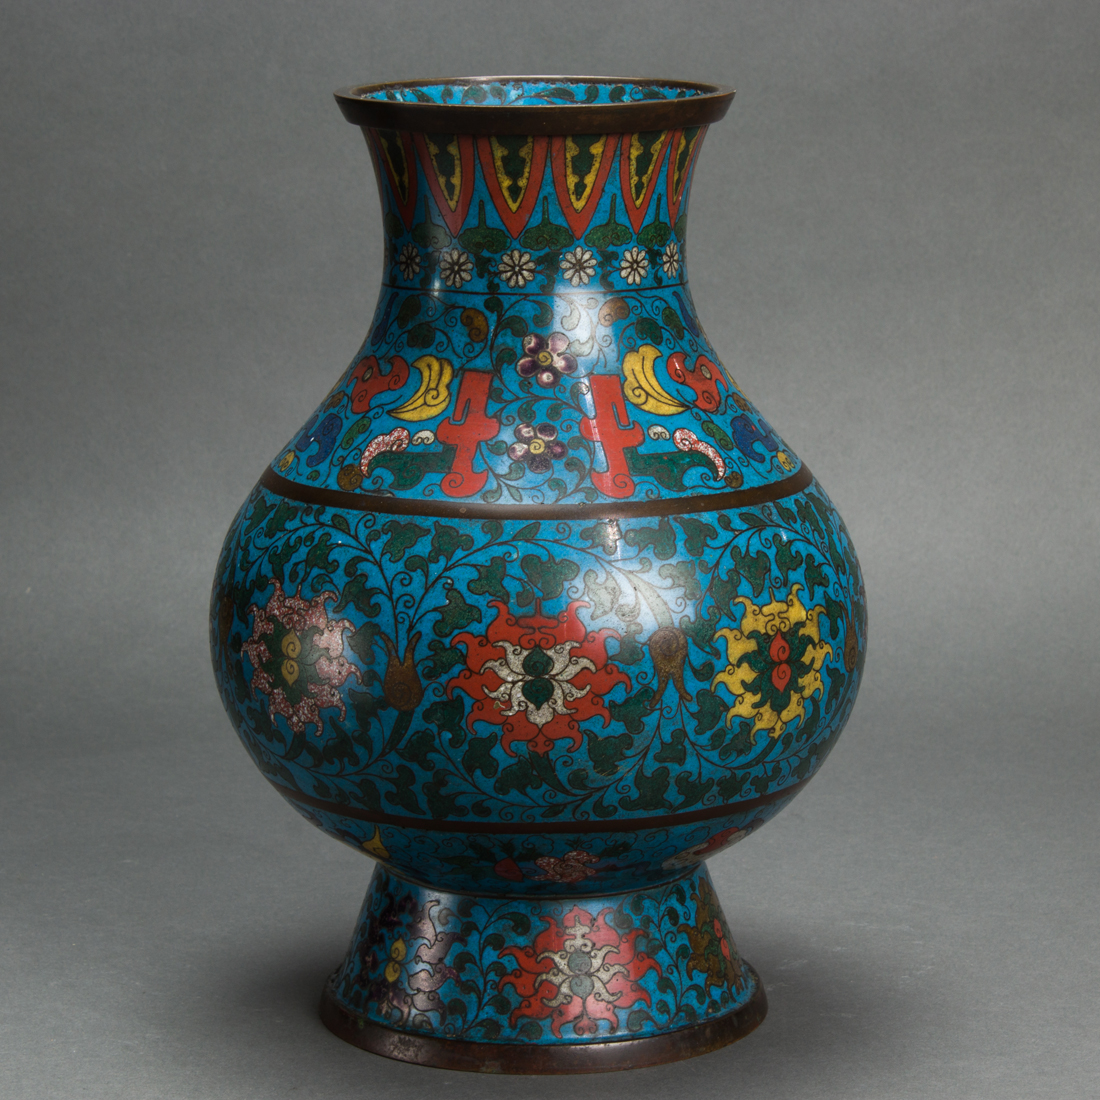 A CHINESE CLOISONNE ENAMEL VASE A Chinese